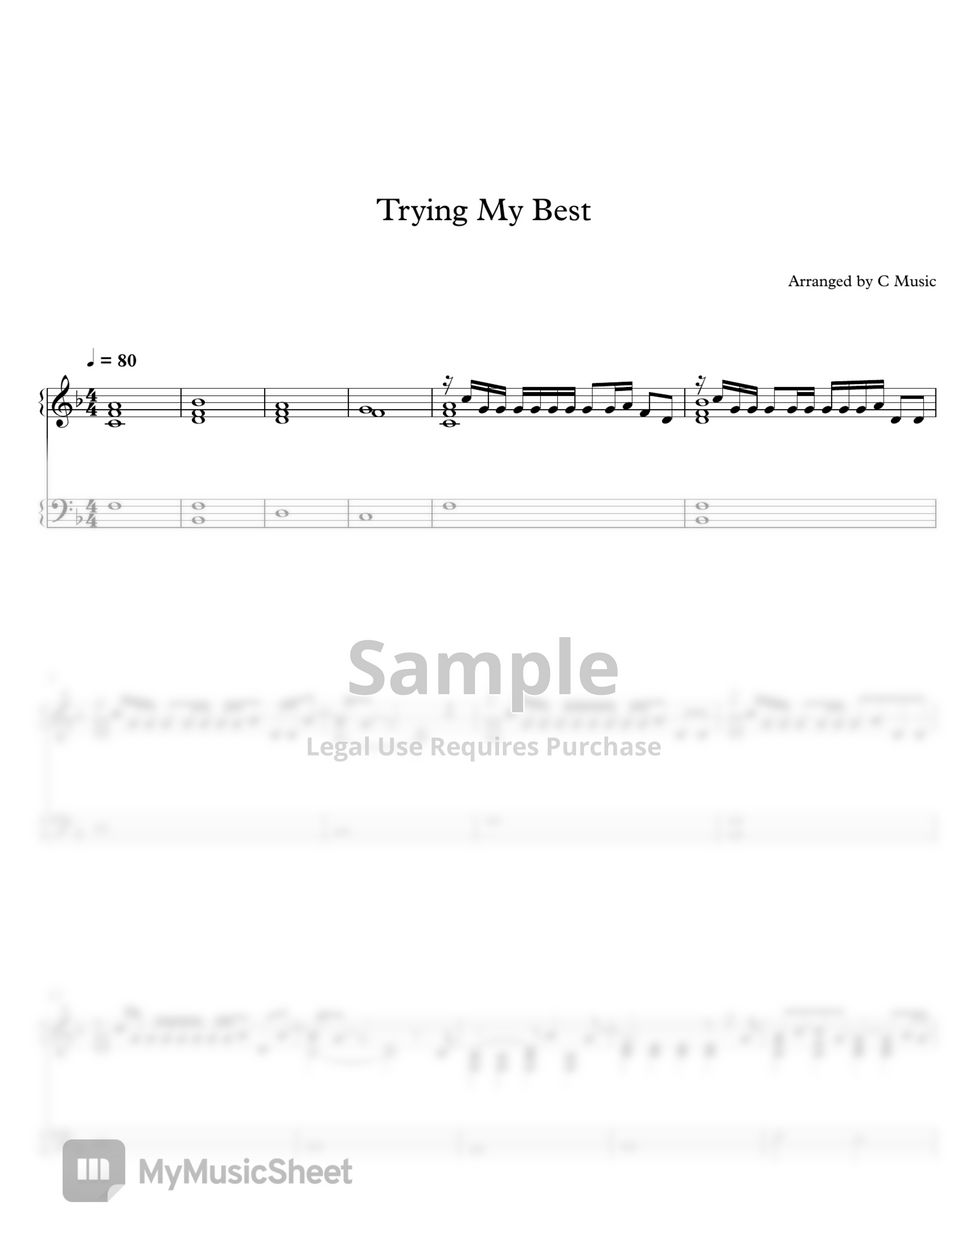 Anson Seabra - Trying My Best by C Music